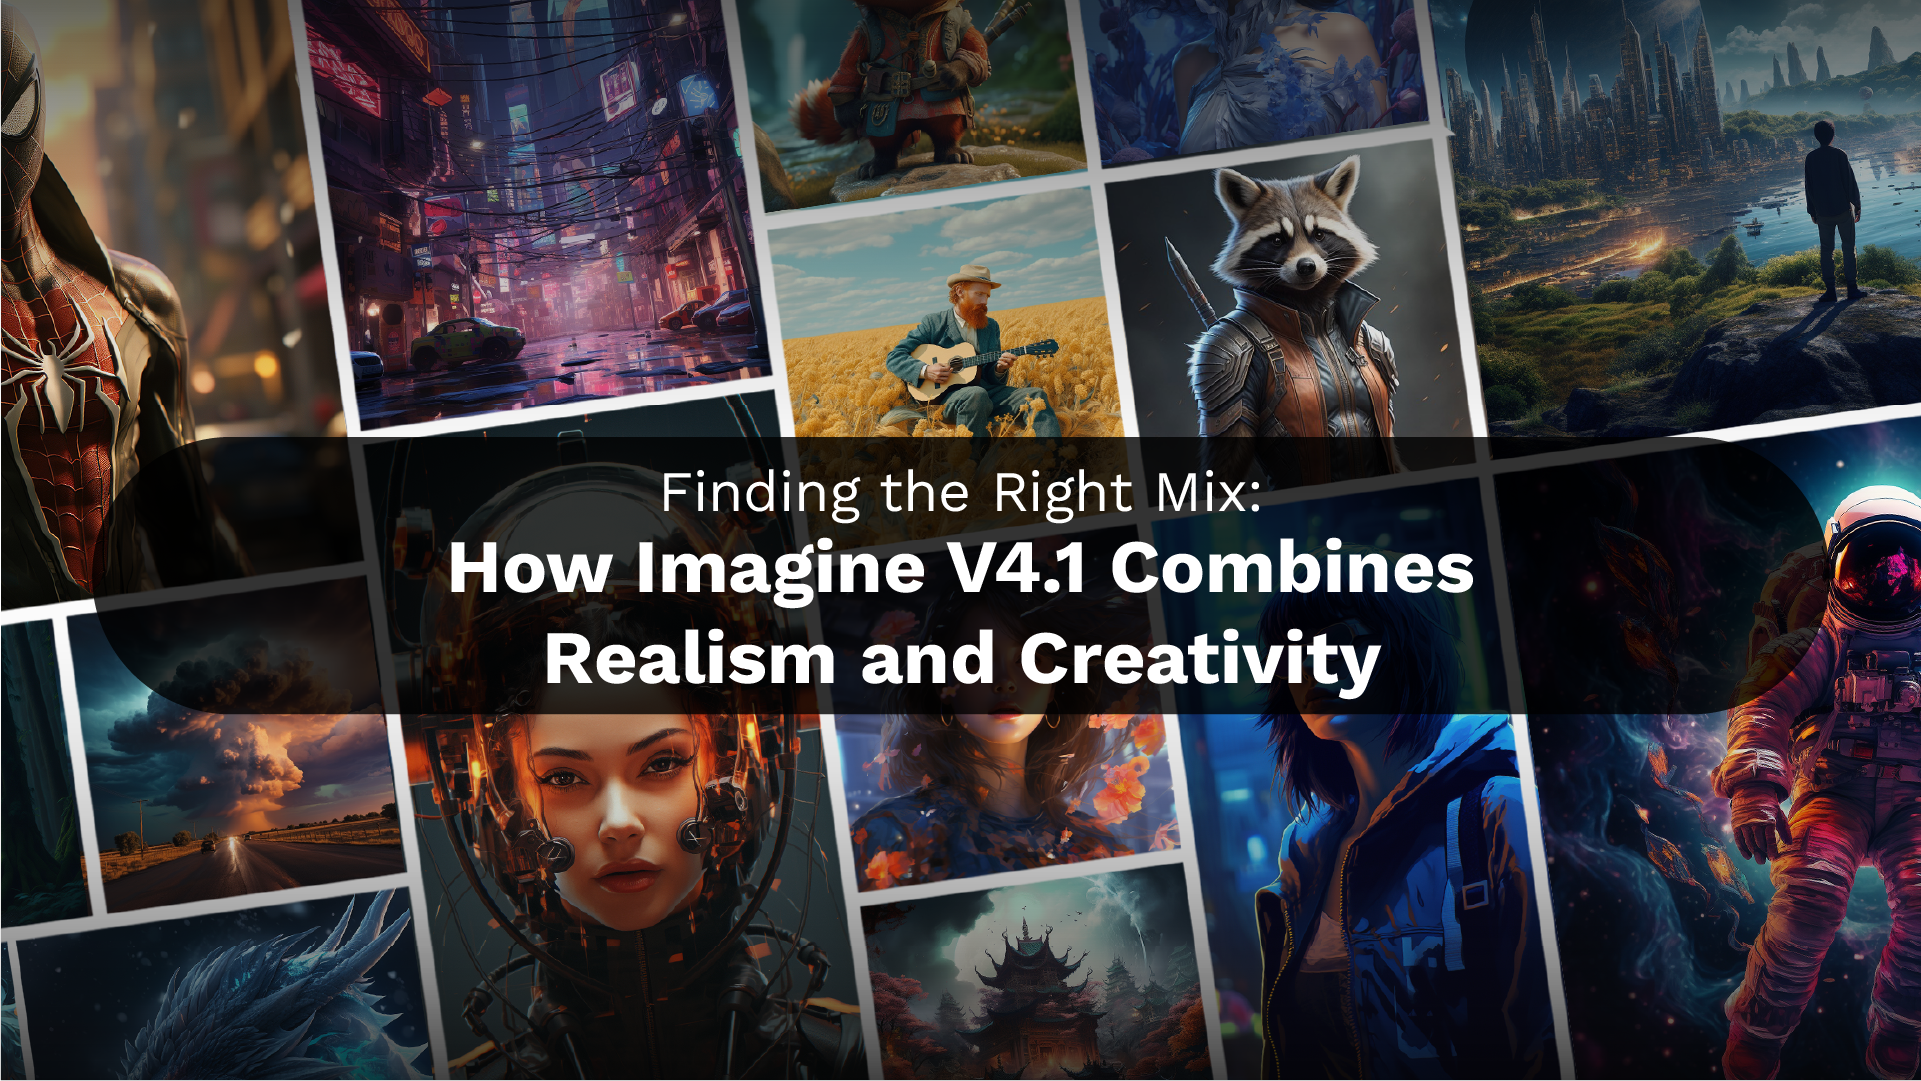 Finding the Right Mix: How Imagine V4.1 Combines Realism and Creativity 